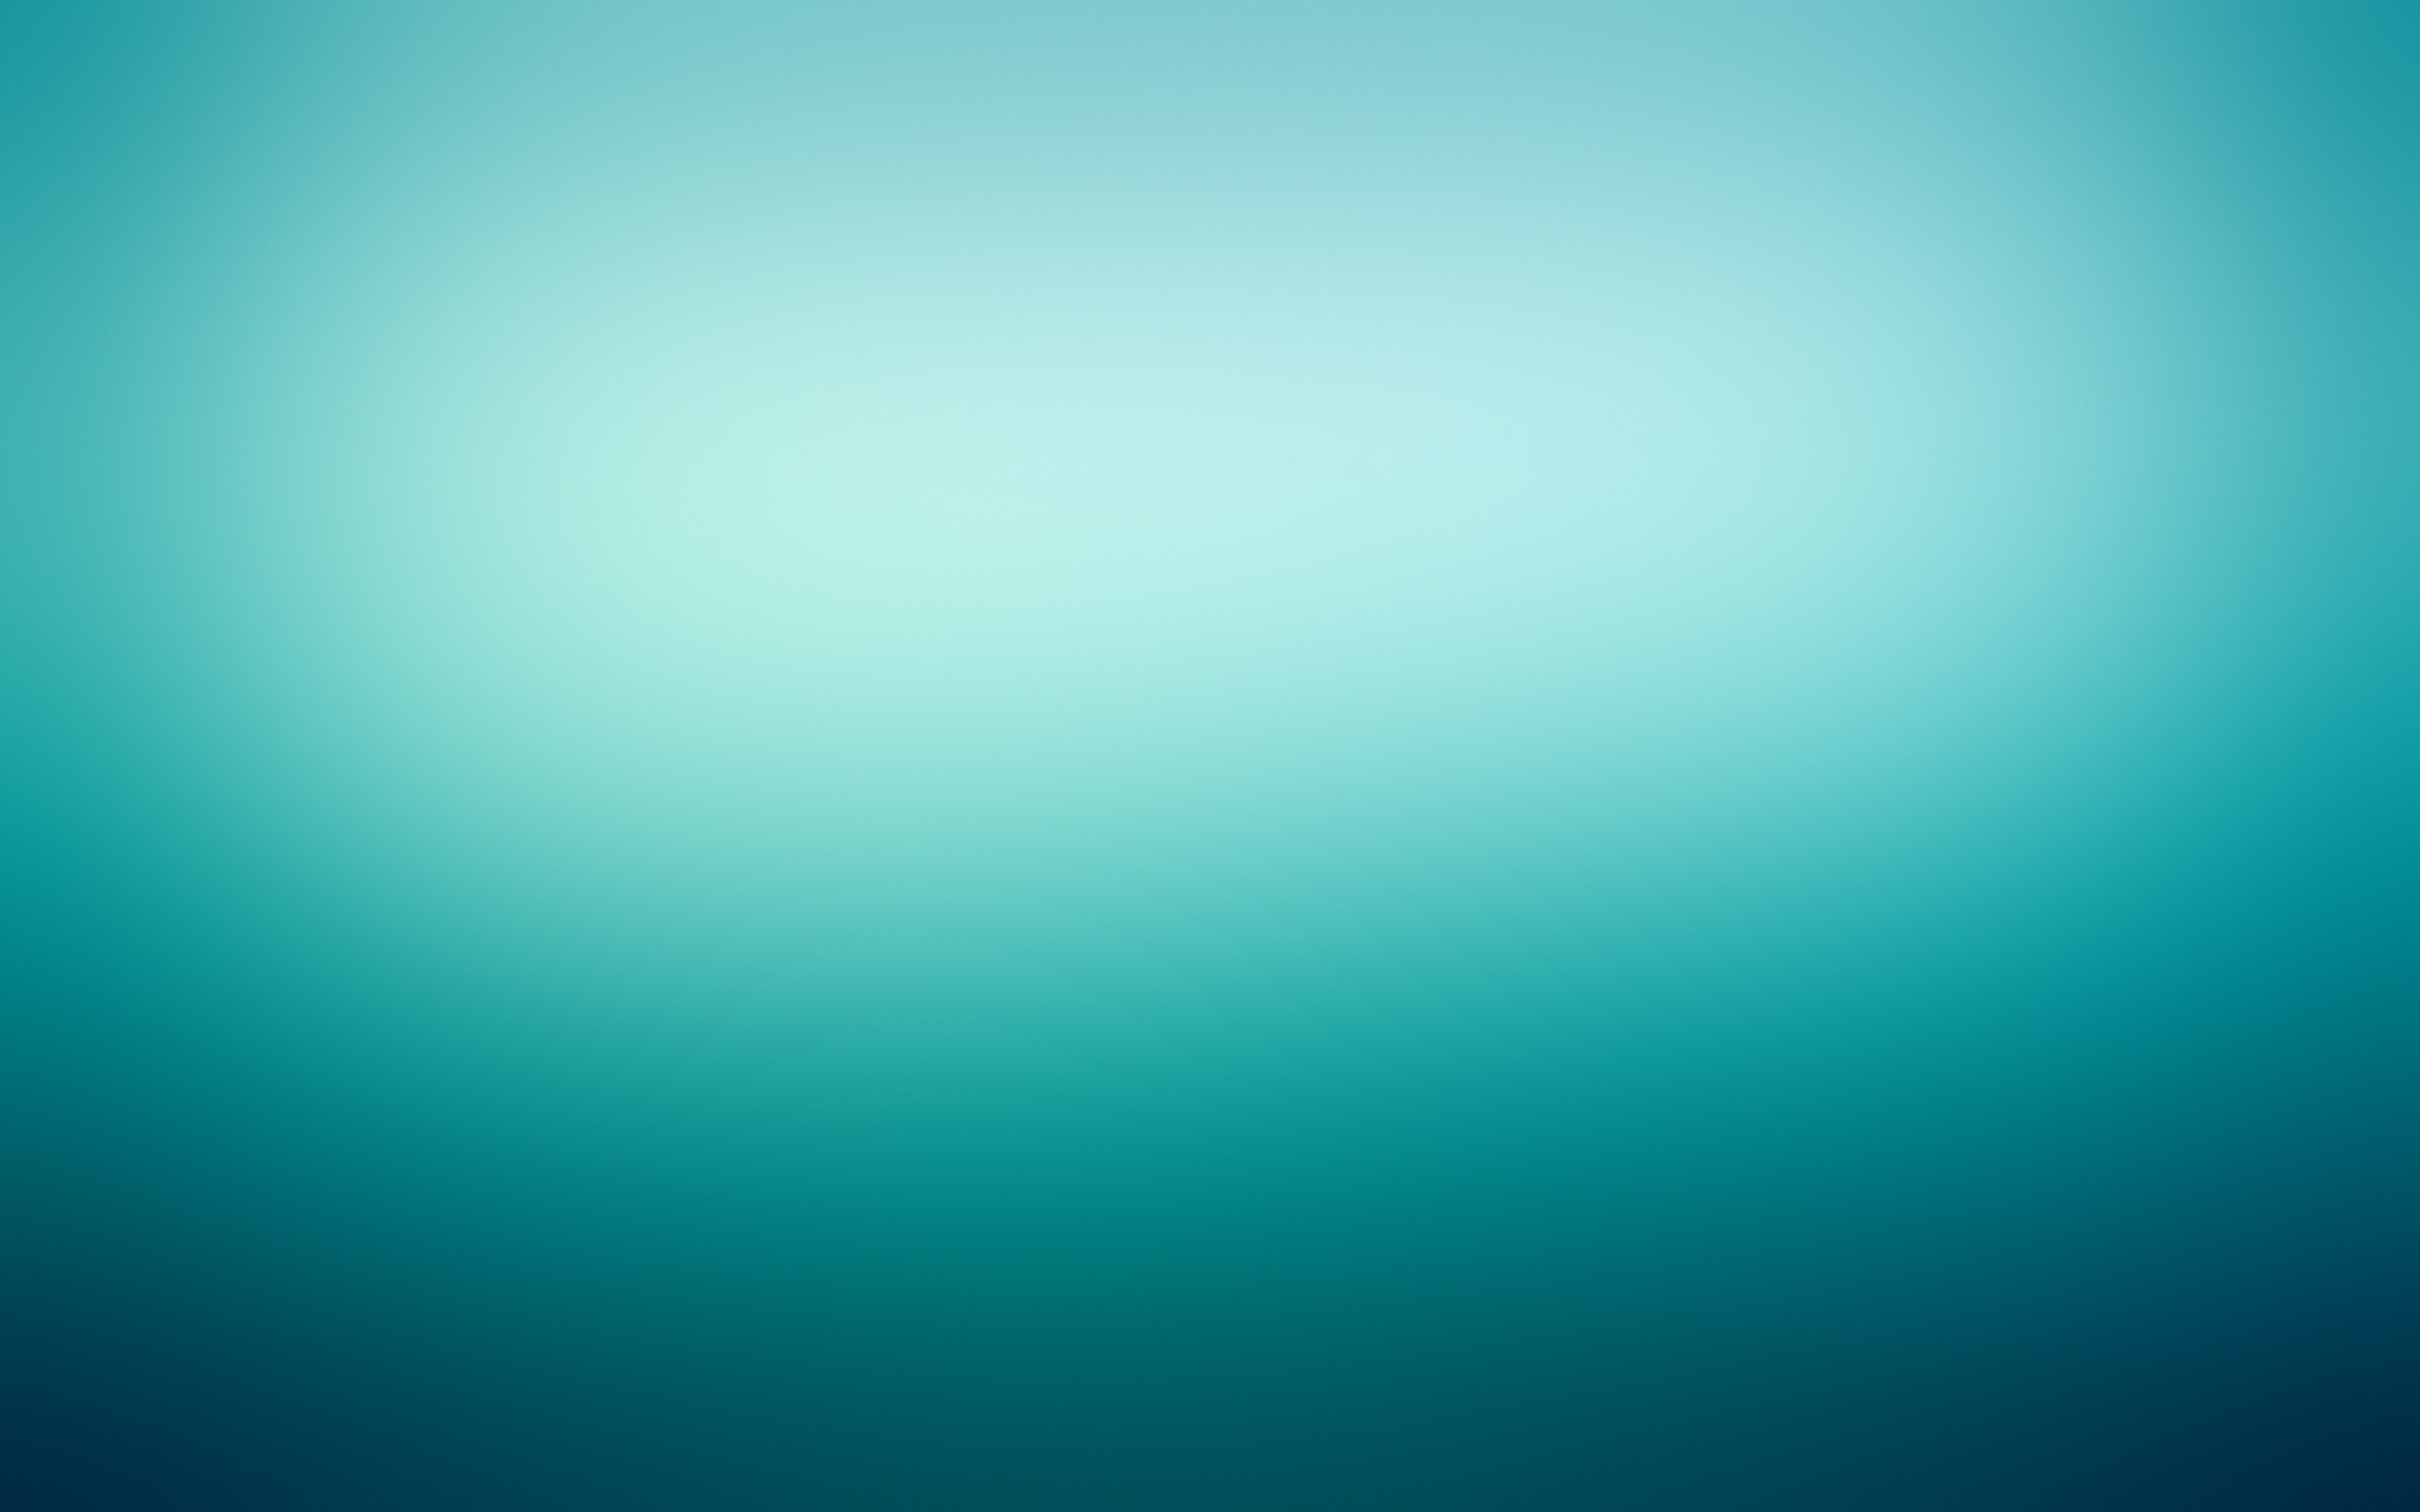 General 2560x1600 gradient turquoise cyan blue cyan background texture simple background